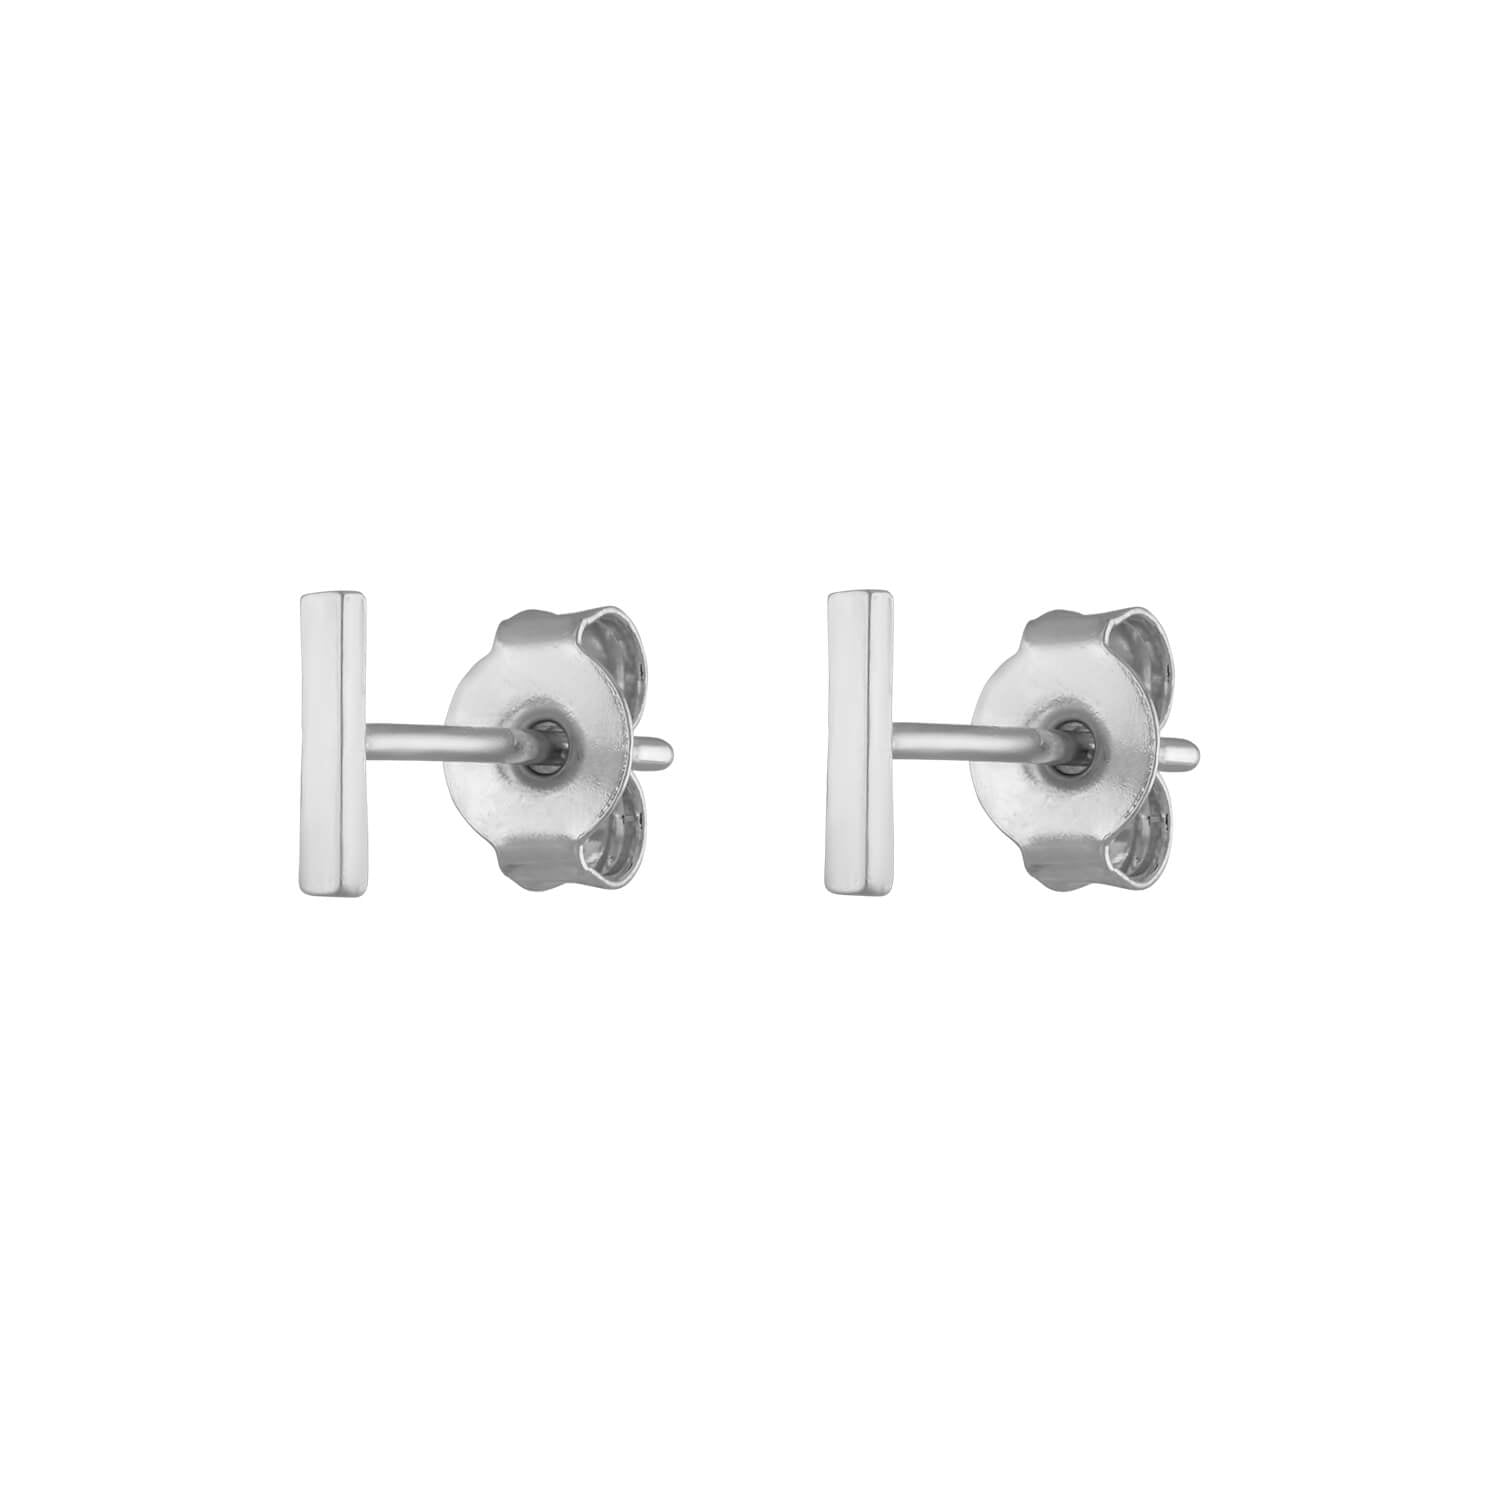 Earring Backs, Sterling Silver by Hello Adorn